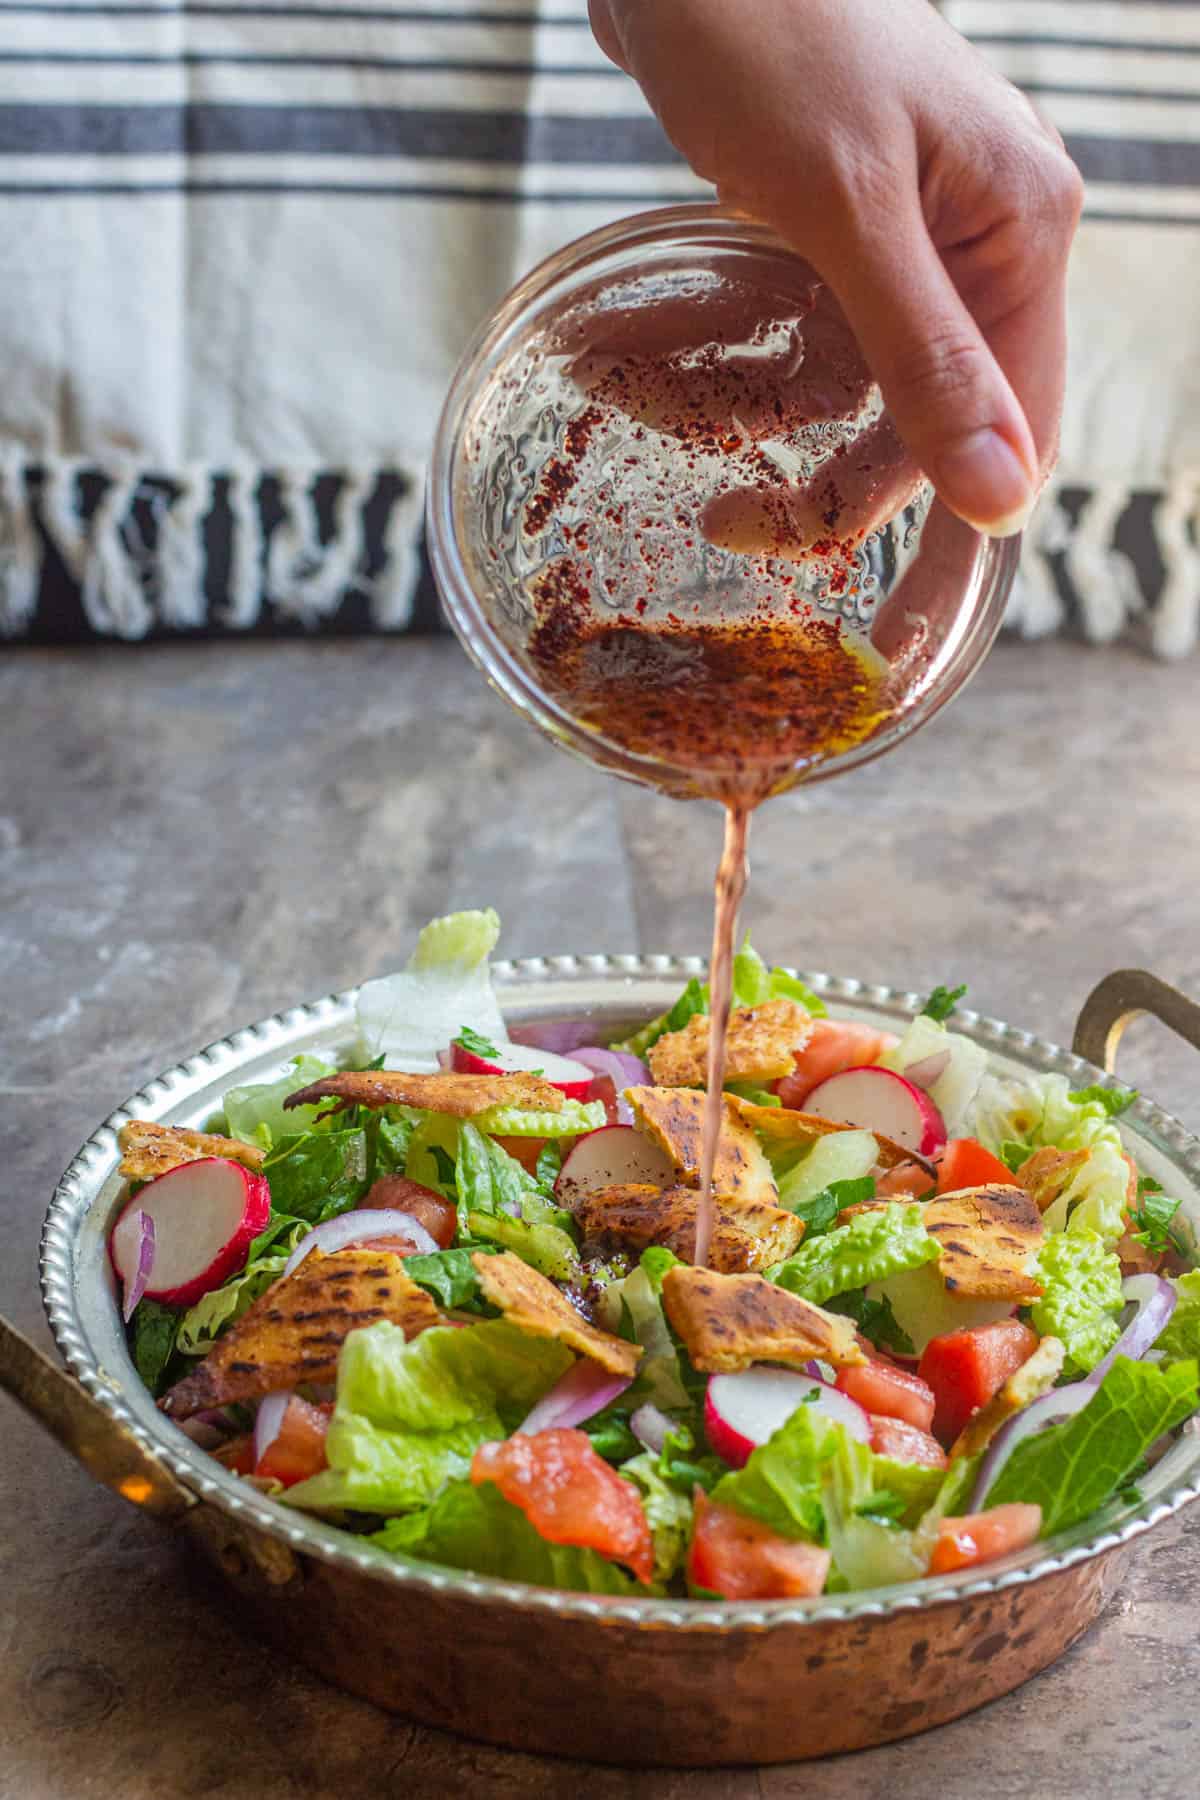 Pour the sauce over the salad and toss to combine. 